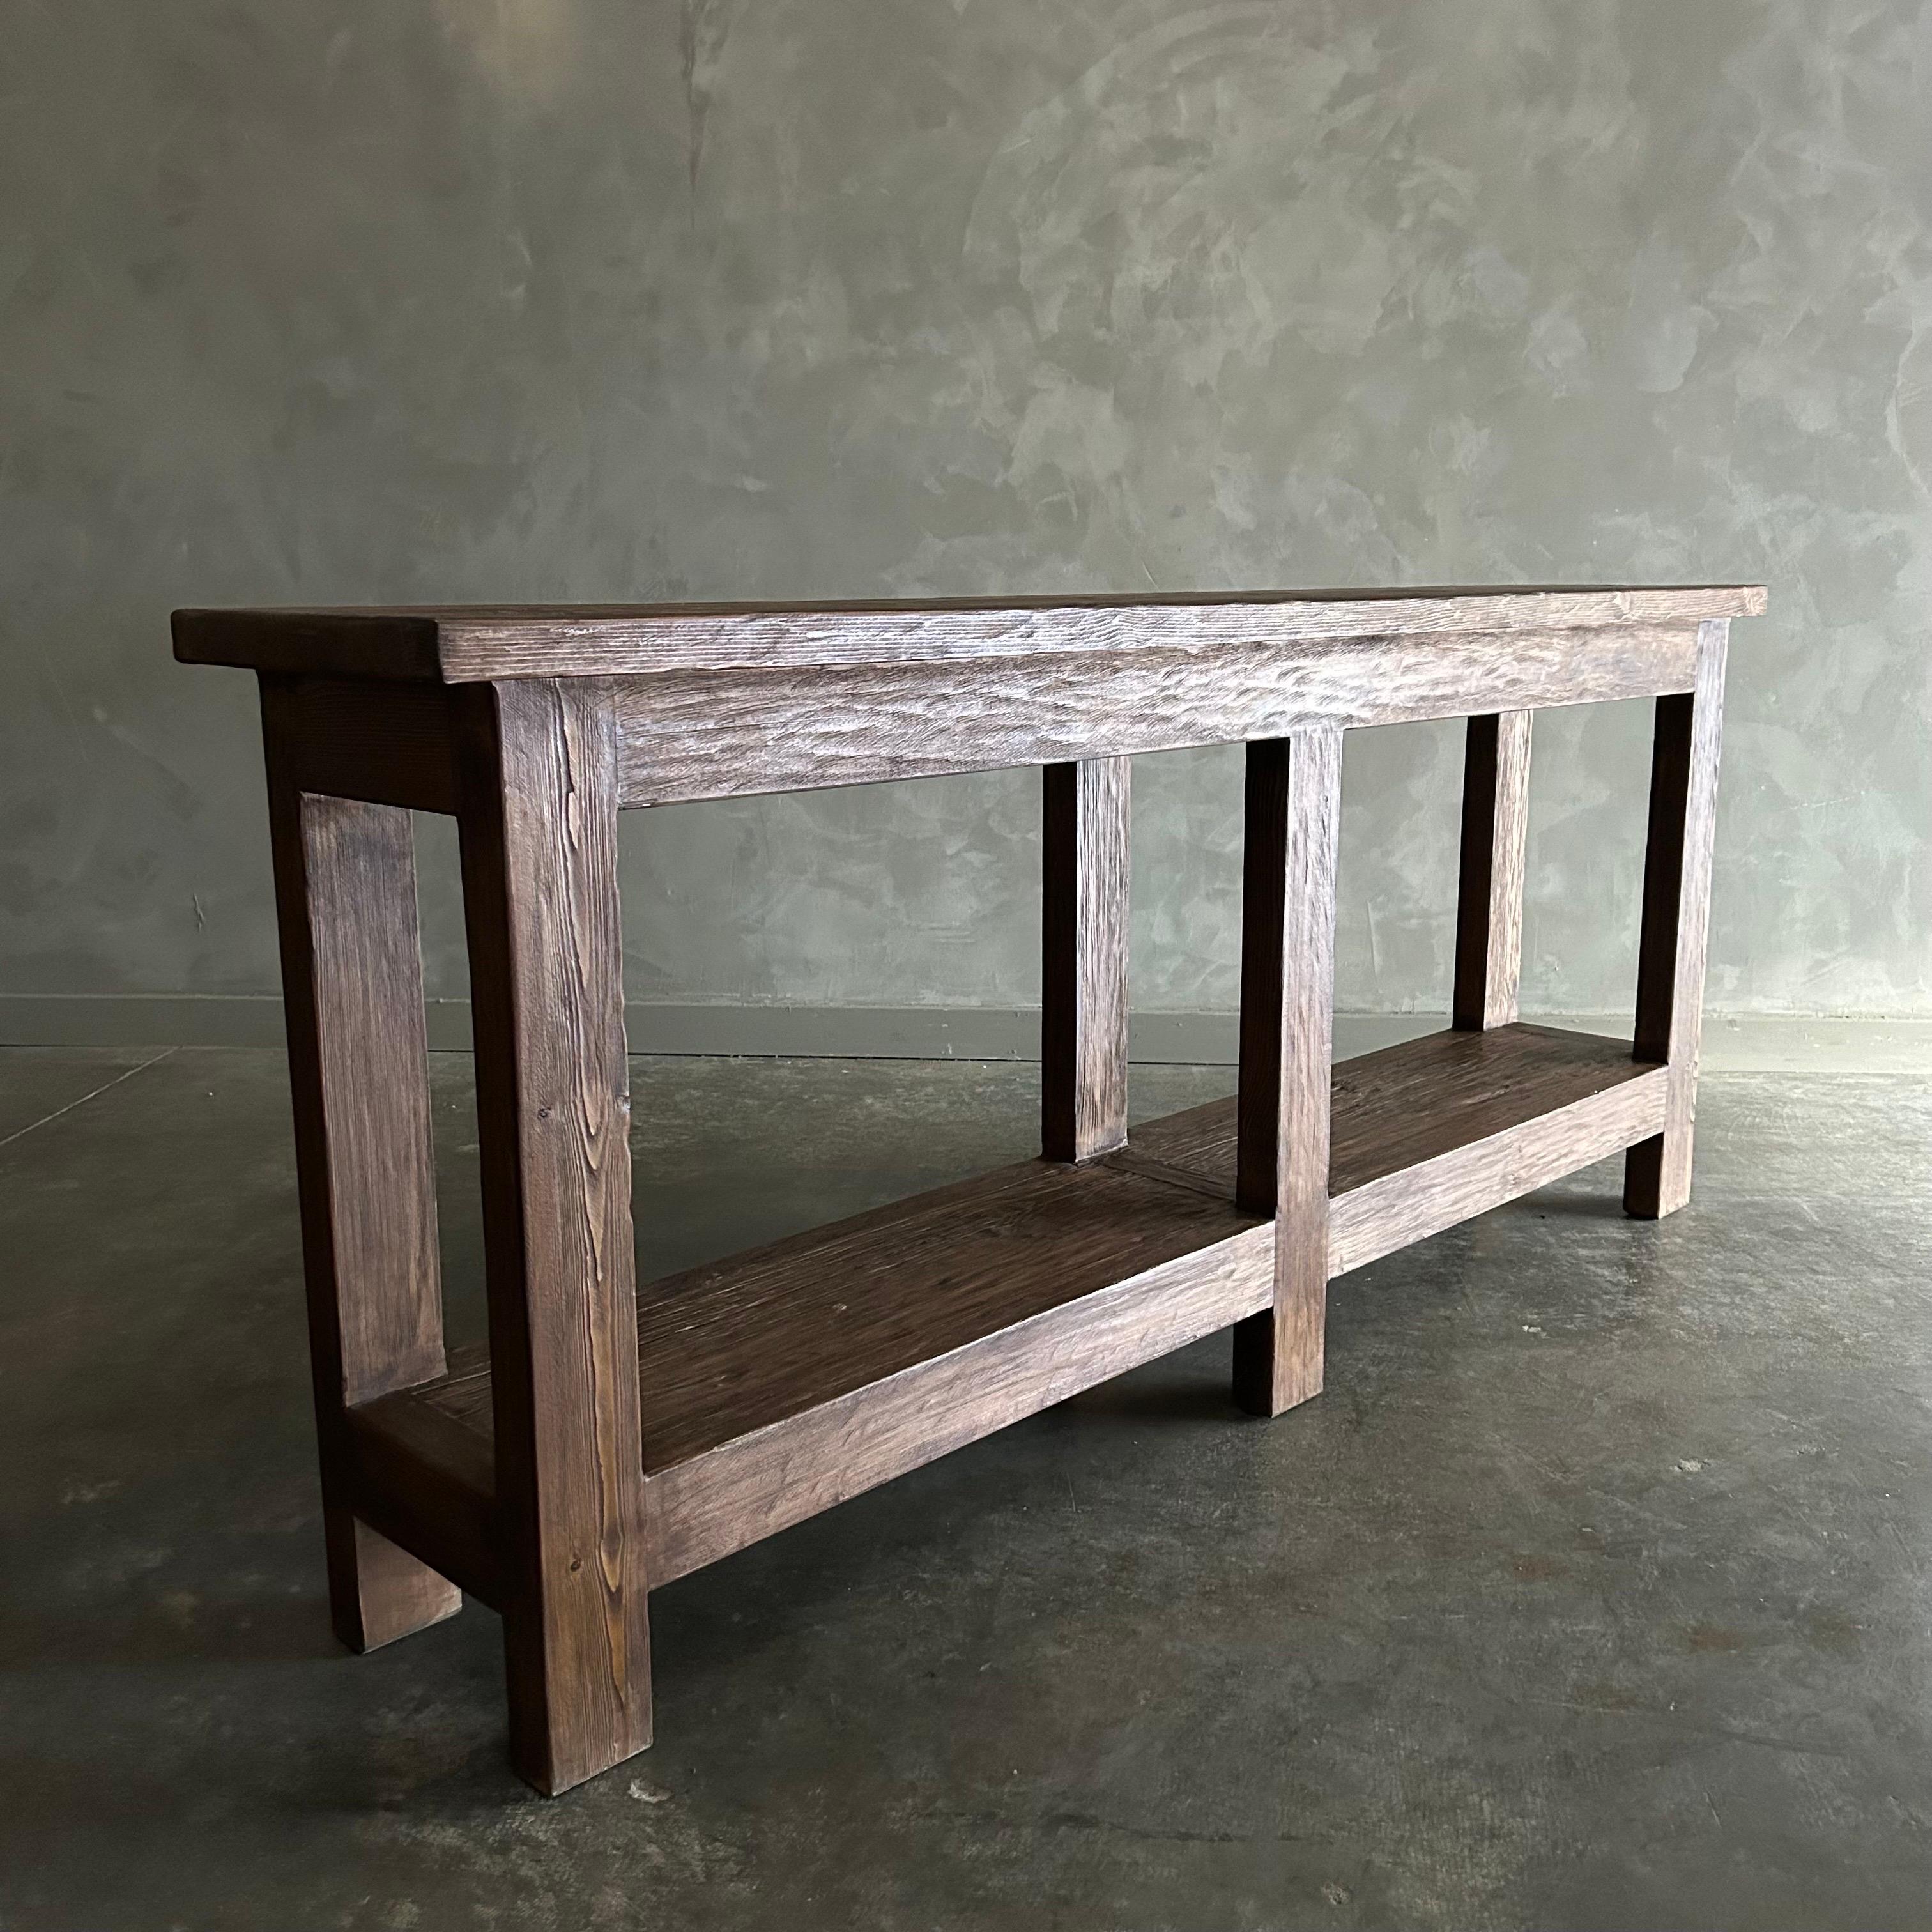 Hand-Crafted Custom Reclaimed Elm Wood Console Table In Dark Finish with Shelf For Sale